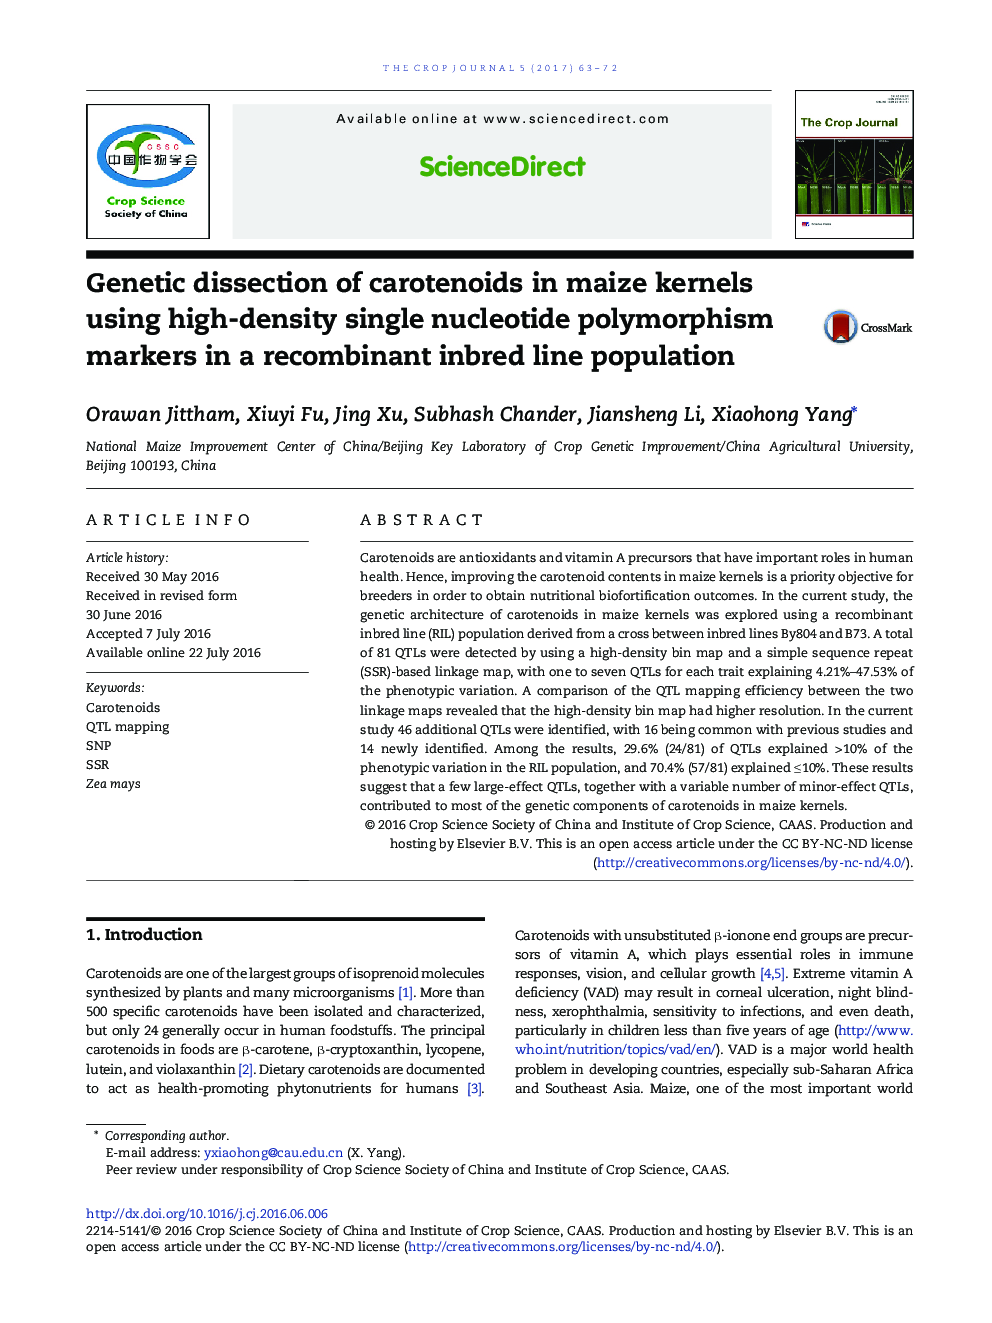 Genetic dissection of carotenoids in maize kernels using high-density single nucleotide polymorphism markers in a recombinant inbred line population